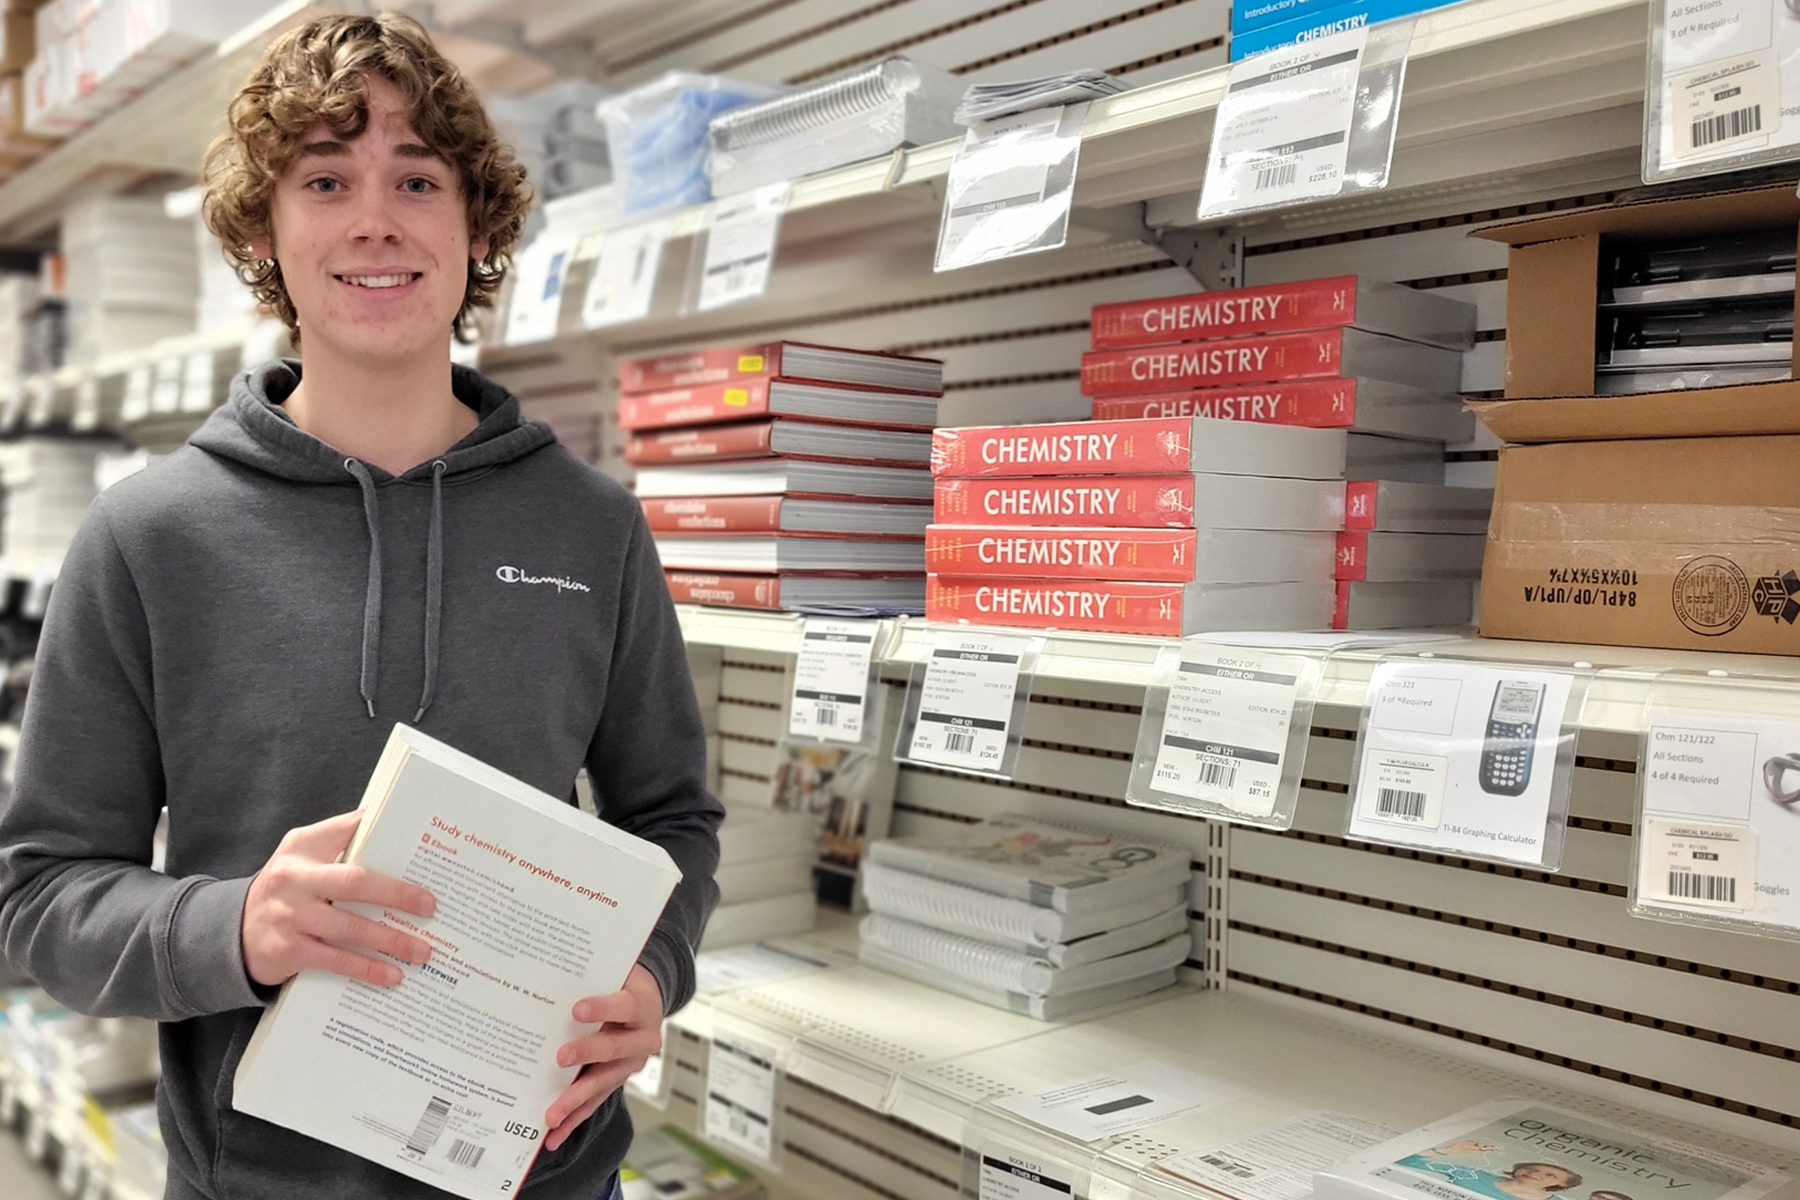 Tanner Litts holding books in the College Store